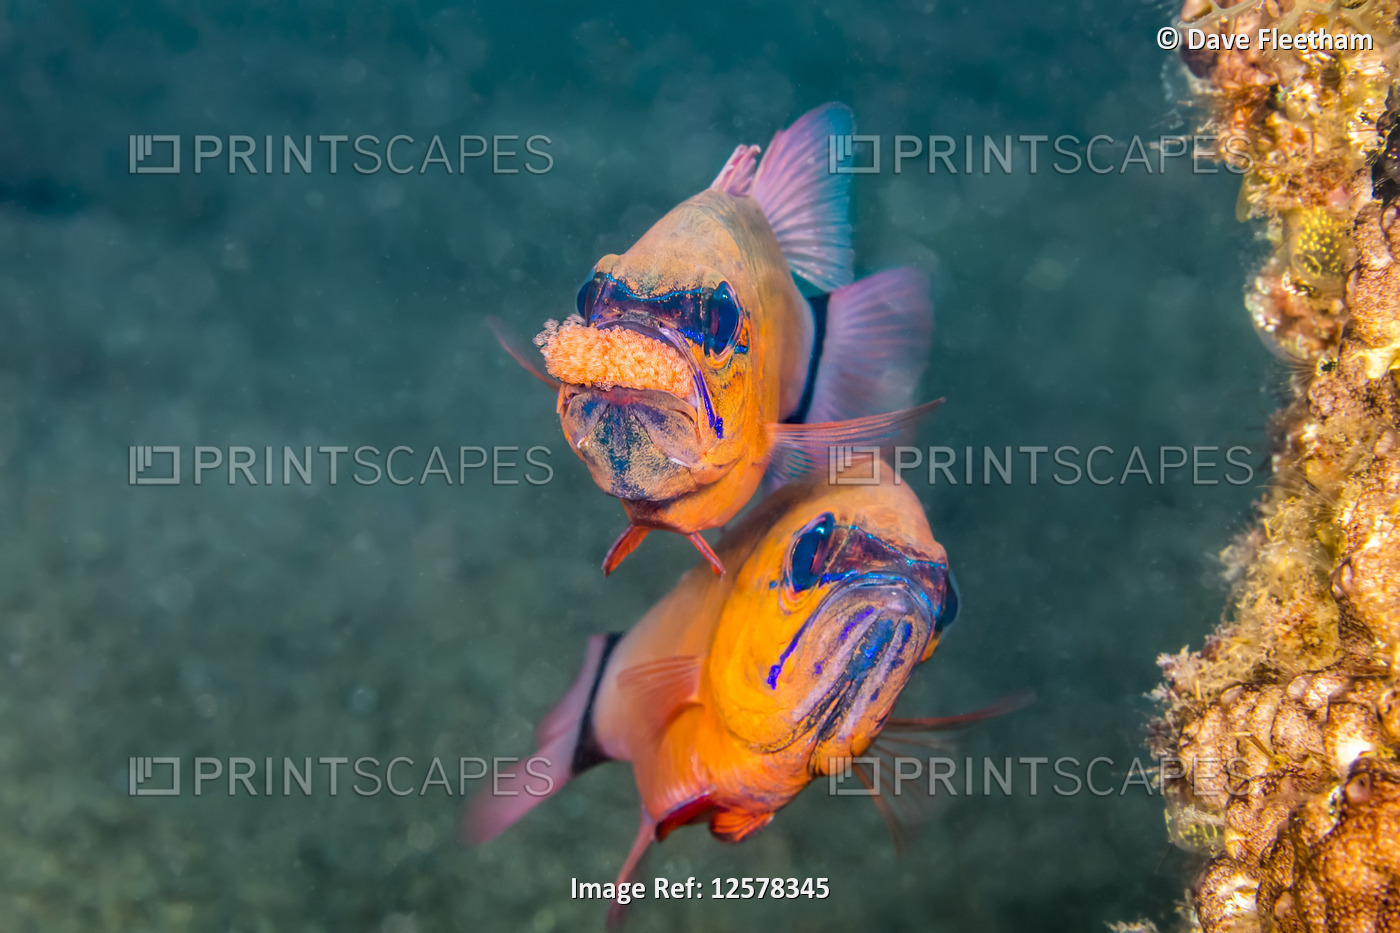 The male ring-tailed cardinal fish (Ostorhinchus aureus) is protecting and ...